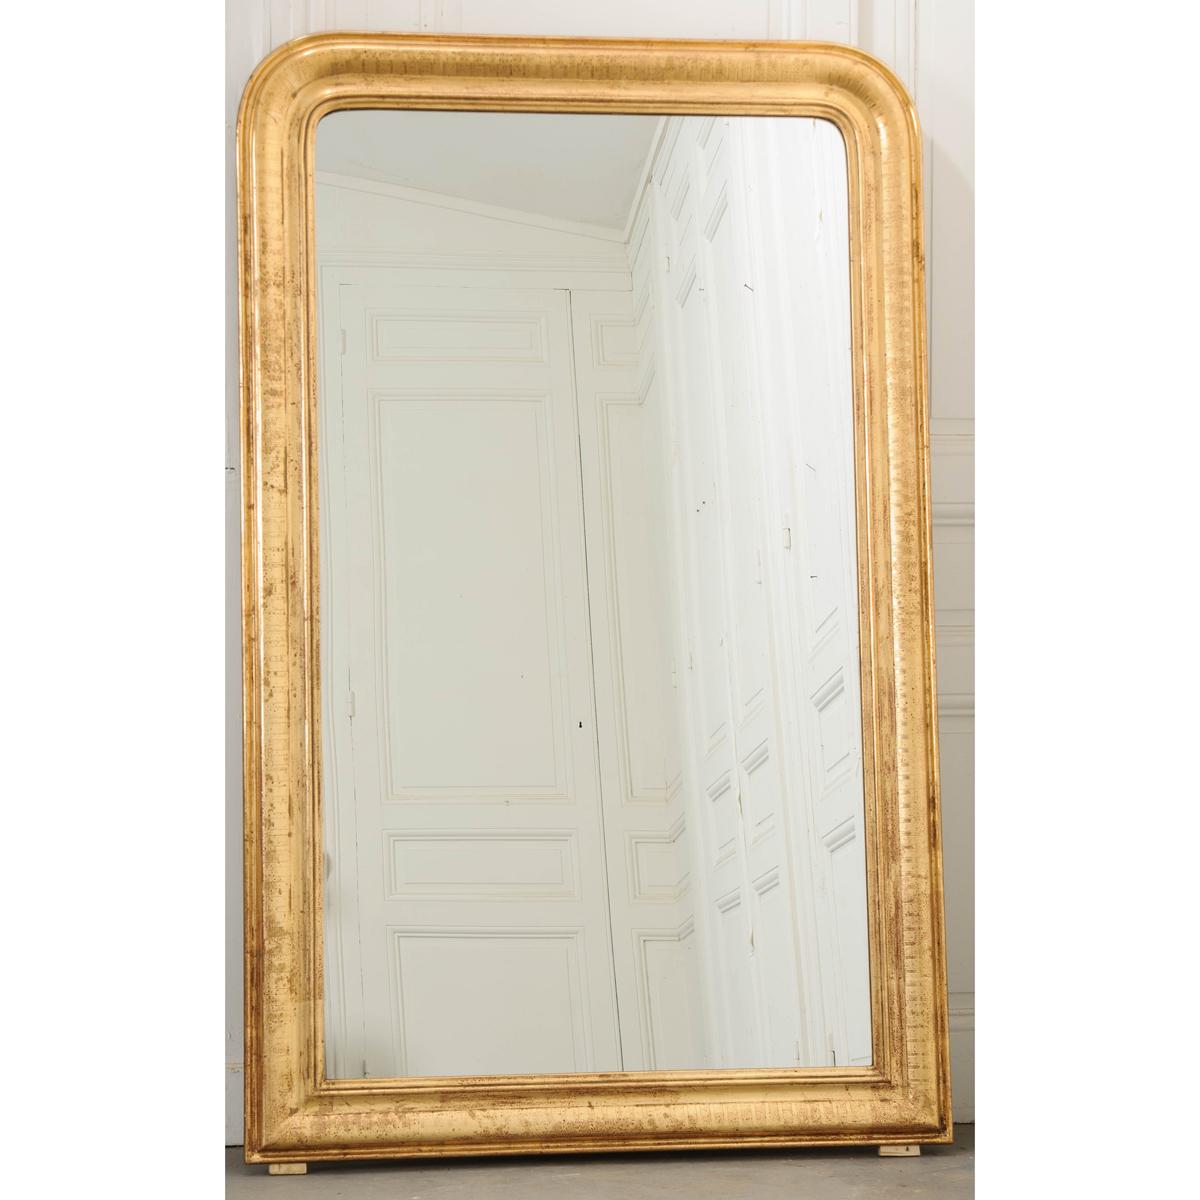 A fine pair of large gold giltwood mirrors from 20th century France. These mirrors are reproductions of the highest quality and embody the Louis Philippe style entirely. The linear frame has its signature curved top corners and brilliant gold gilt